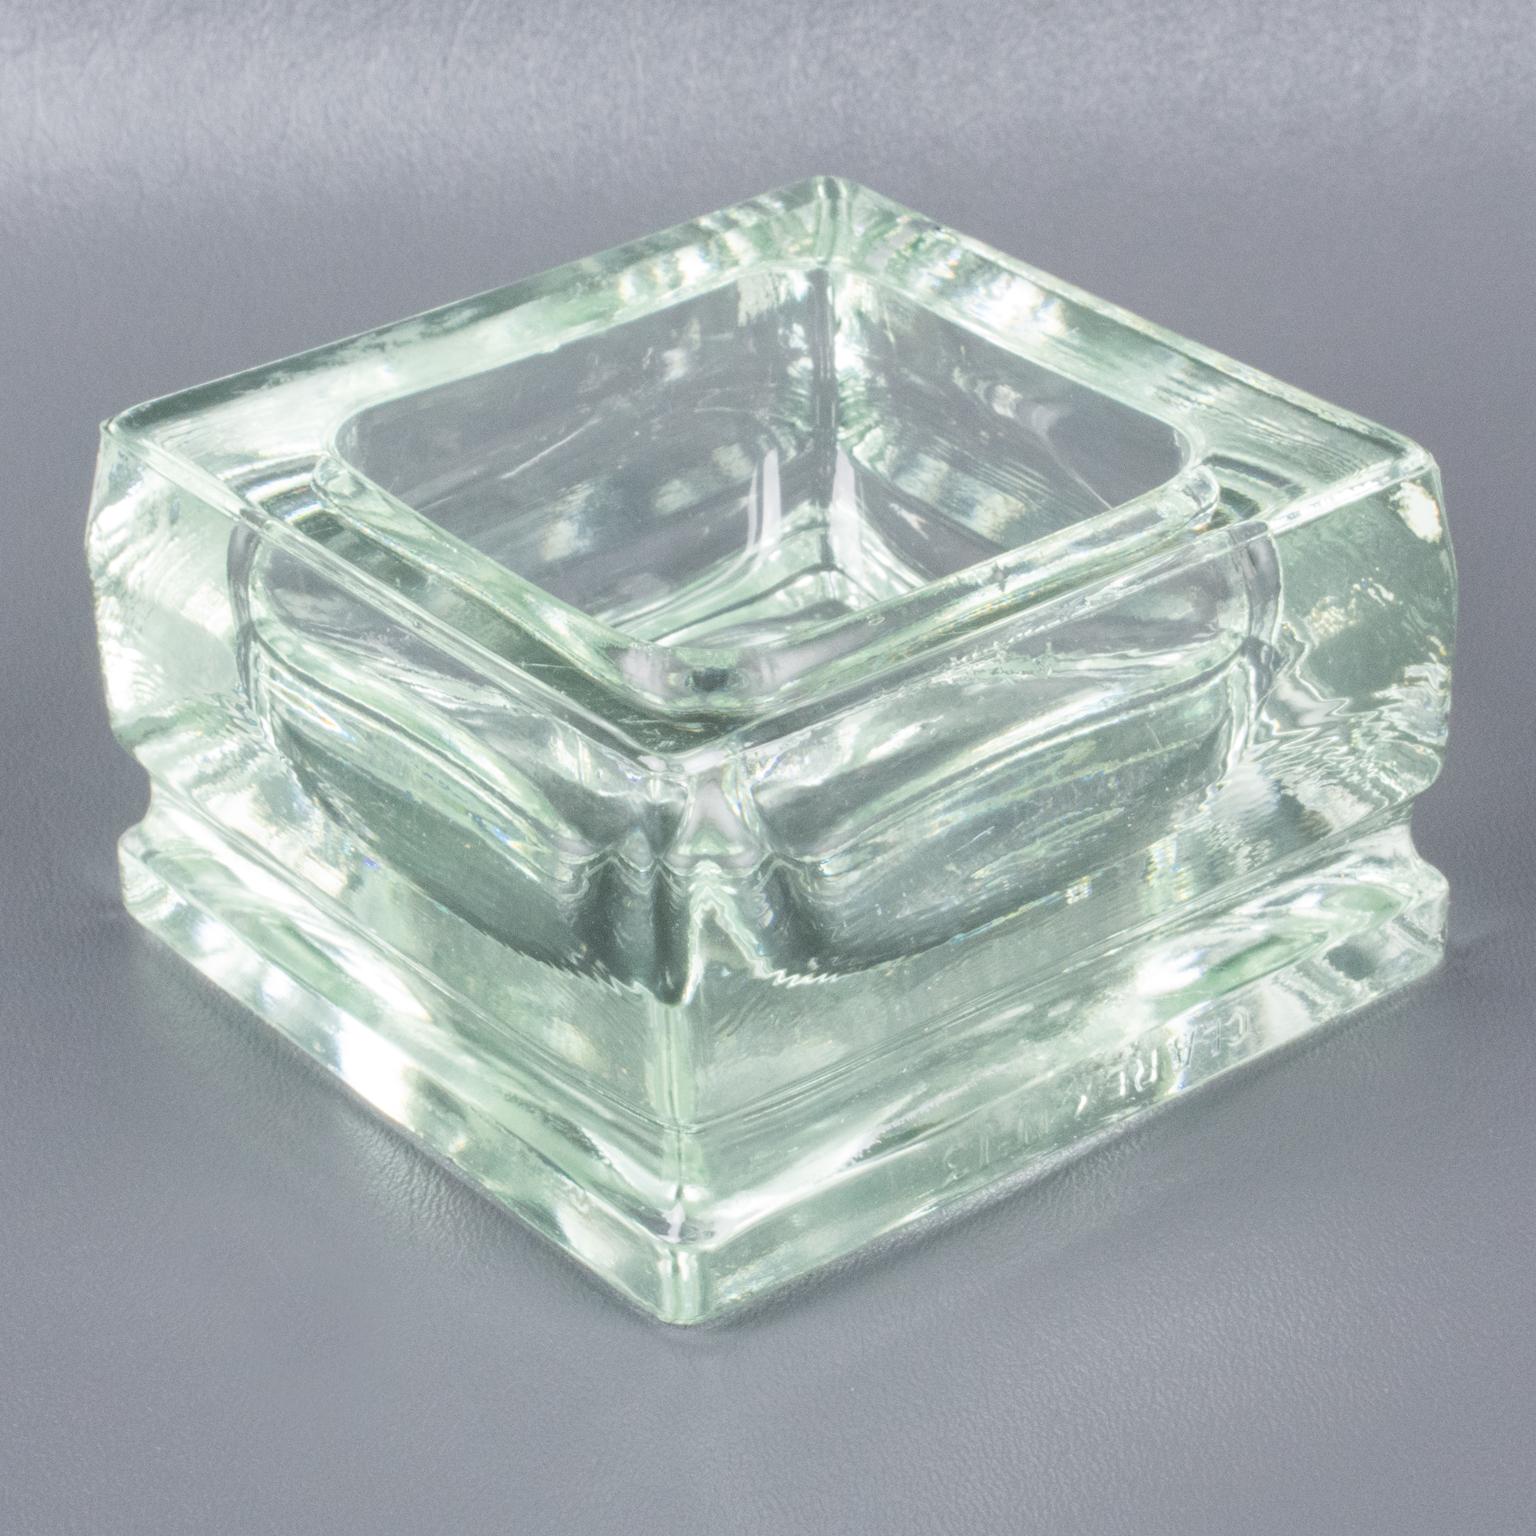 Mid-20th Century Designed by Le Corbusier for Lumax Glass Desk Tidy Ashtray Catchall